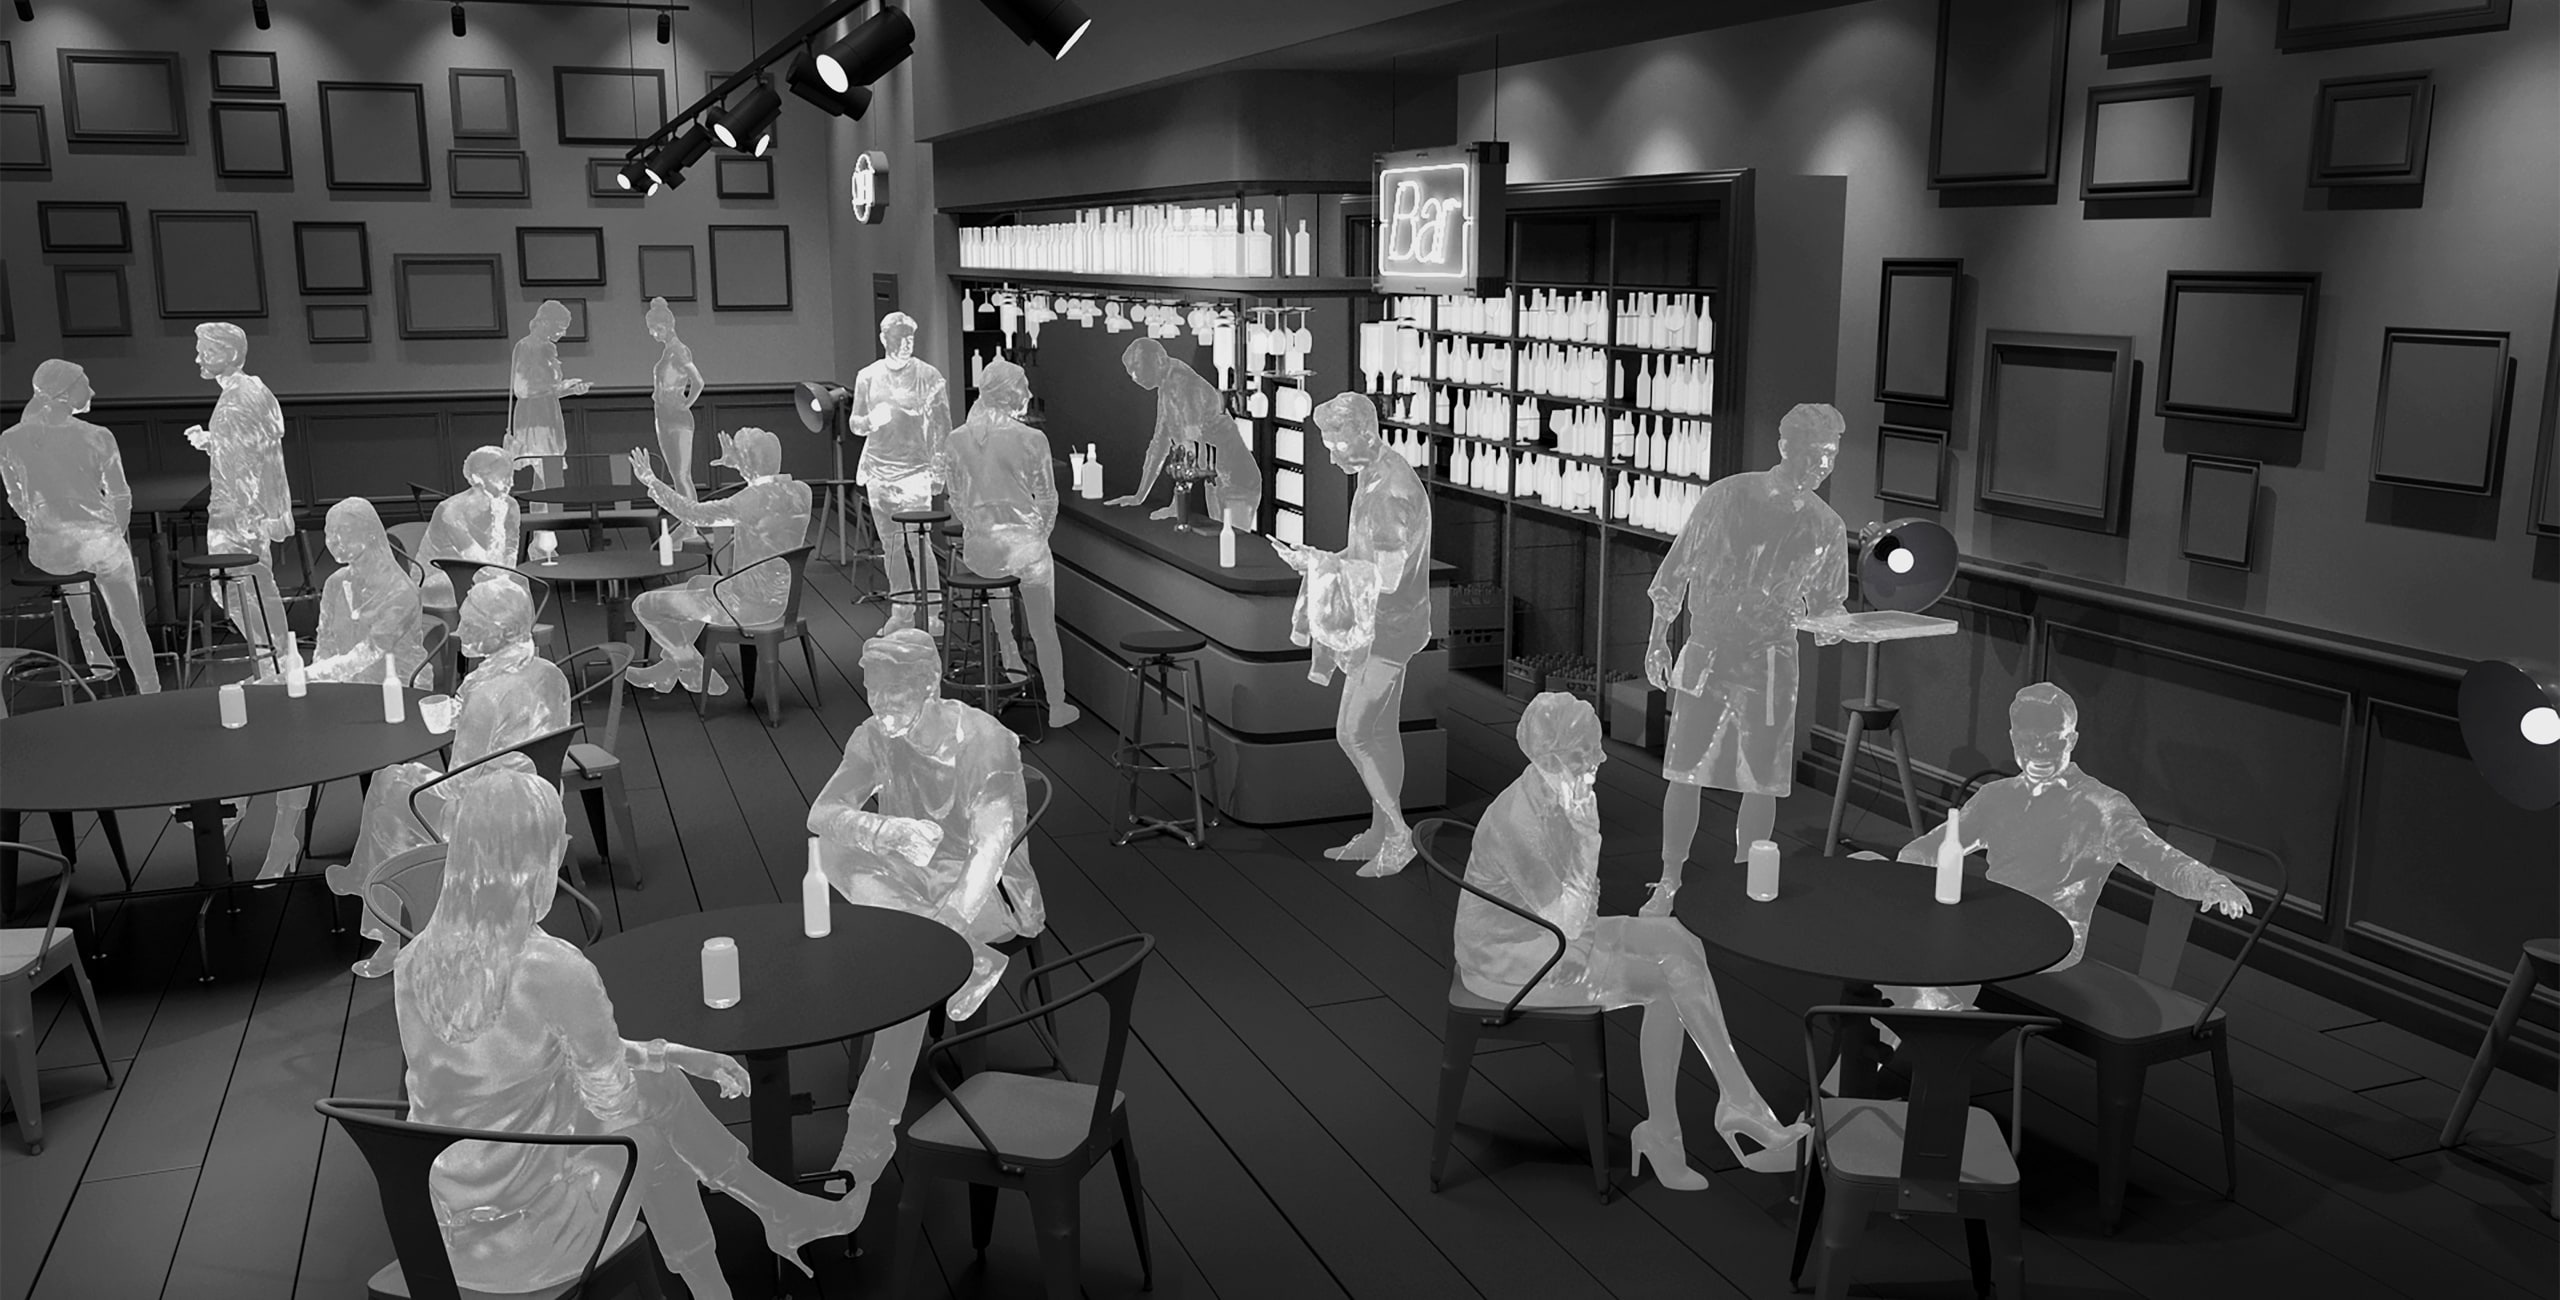 A black and white image of people in a bar.